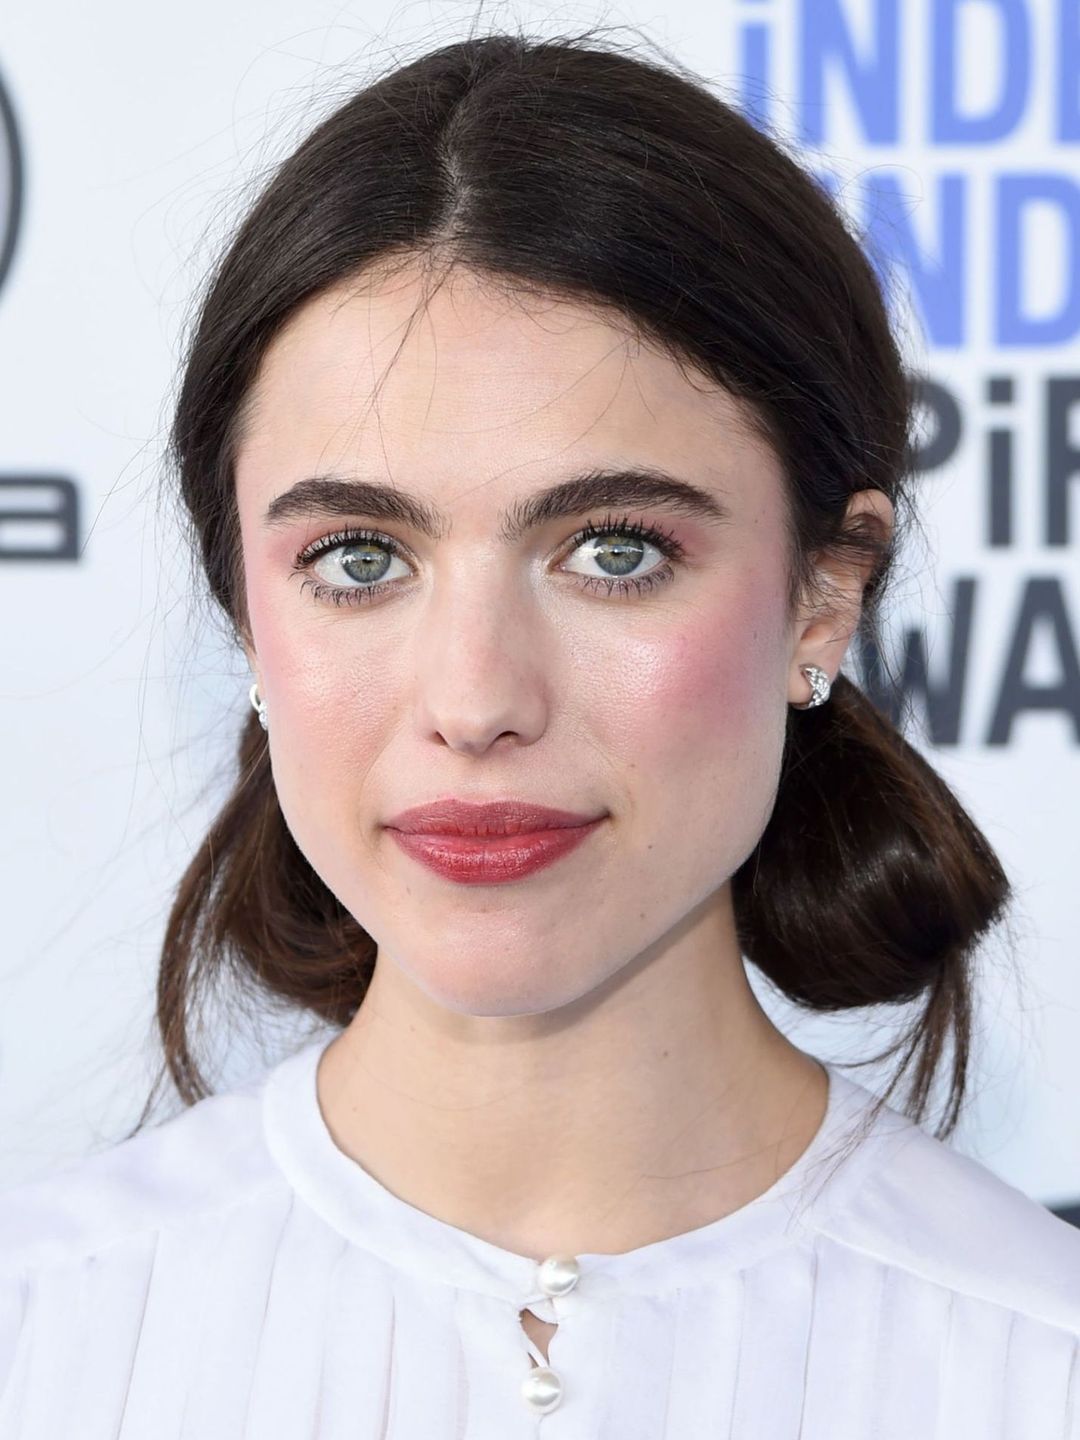 Margaret Qualley early life